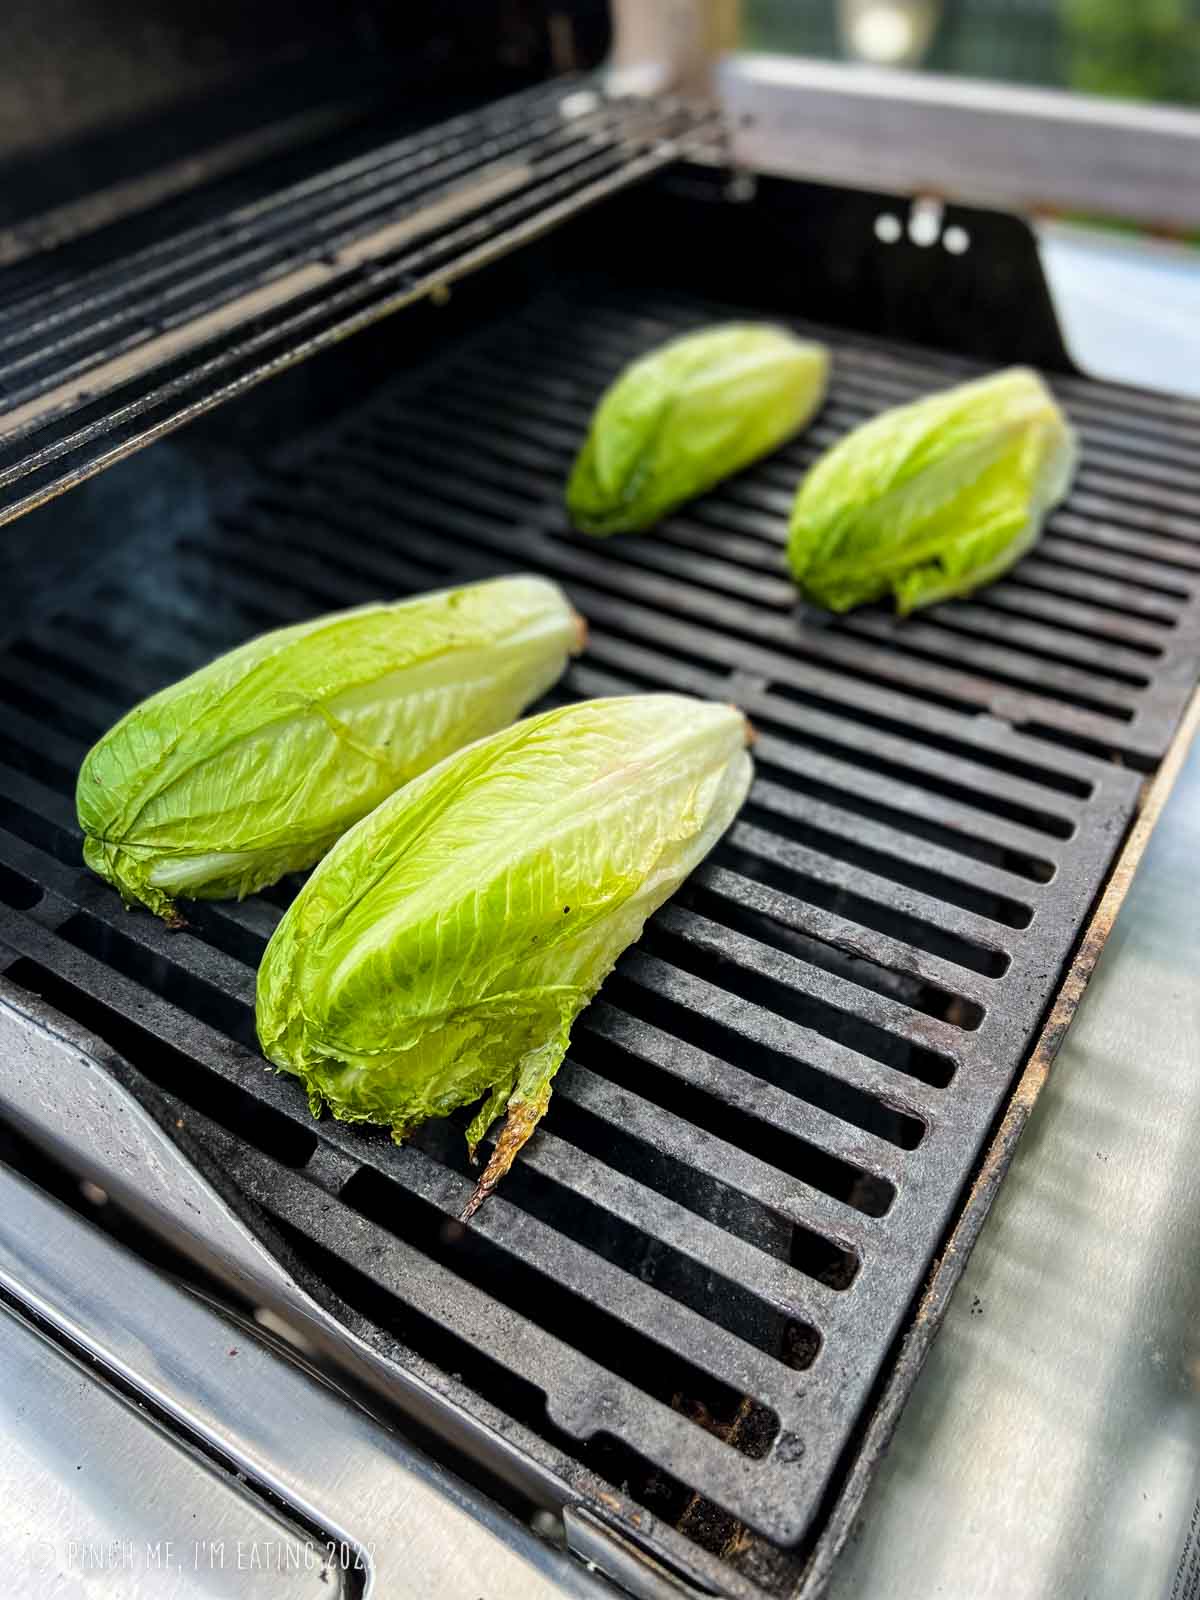 Romaine heart halves cut-side down on a grill.